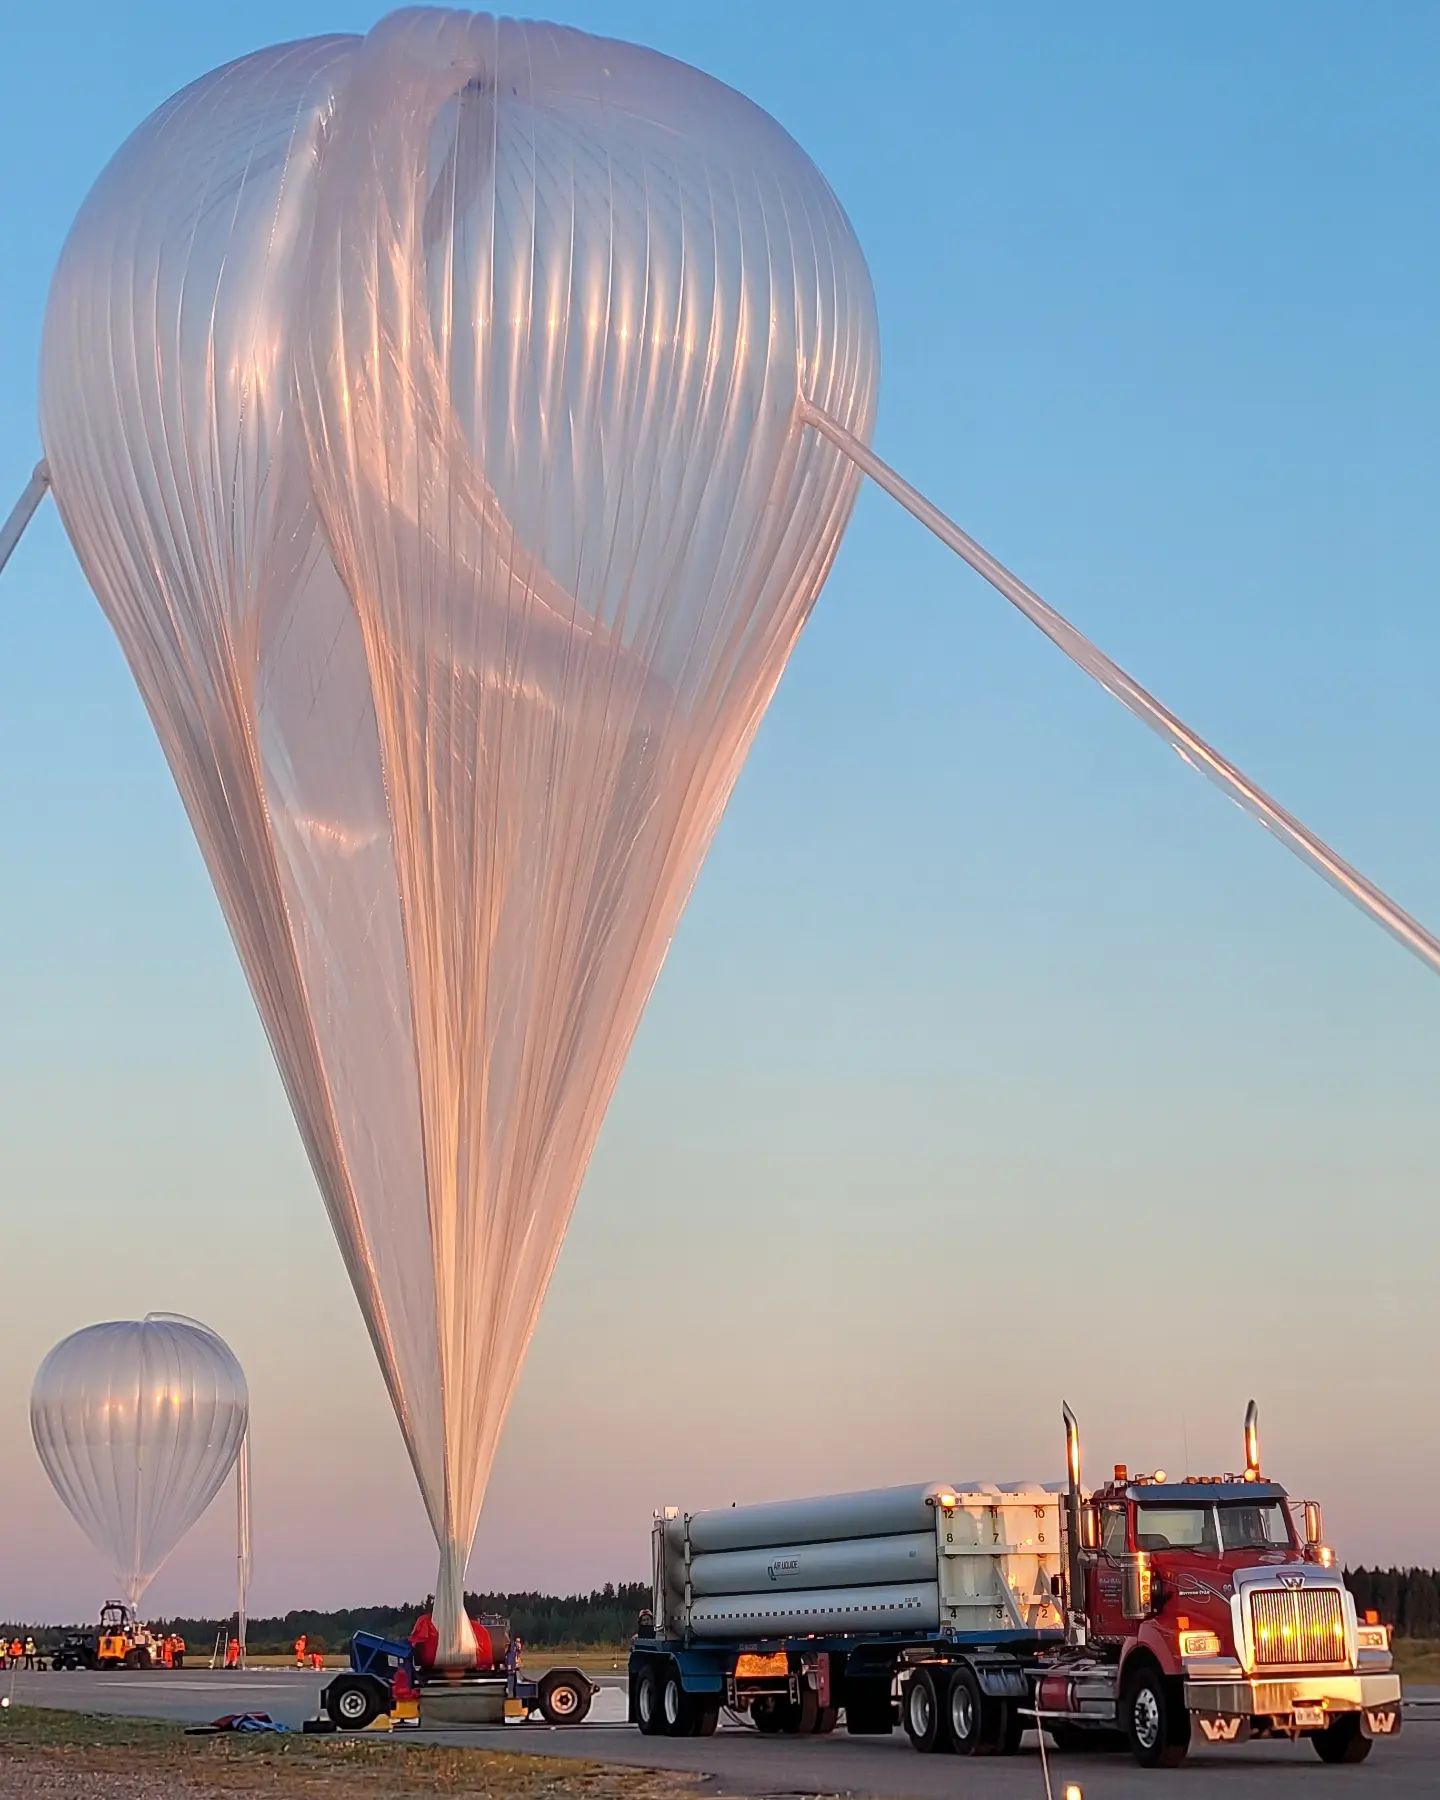 Main balloon inflation (Image: Remy Grenier)